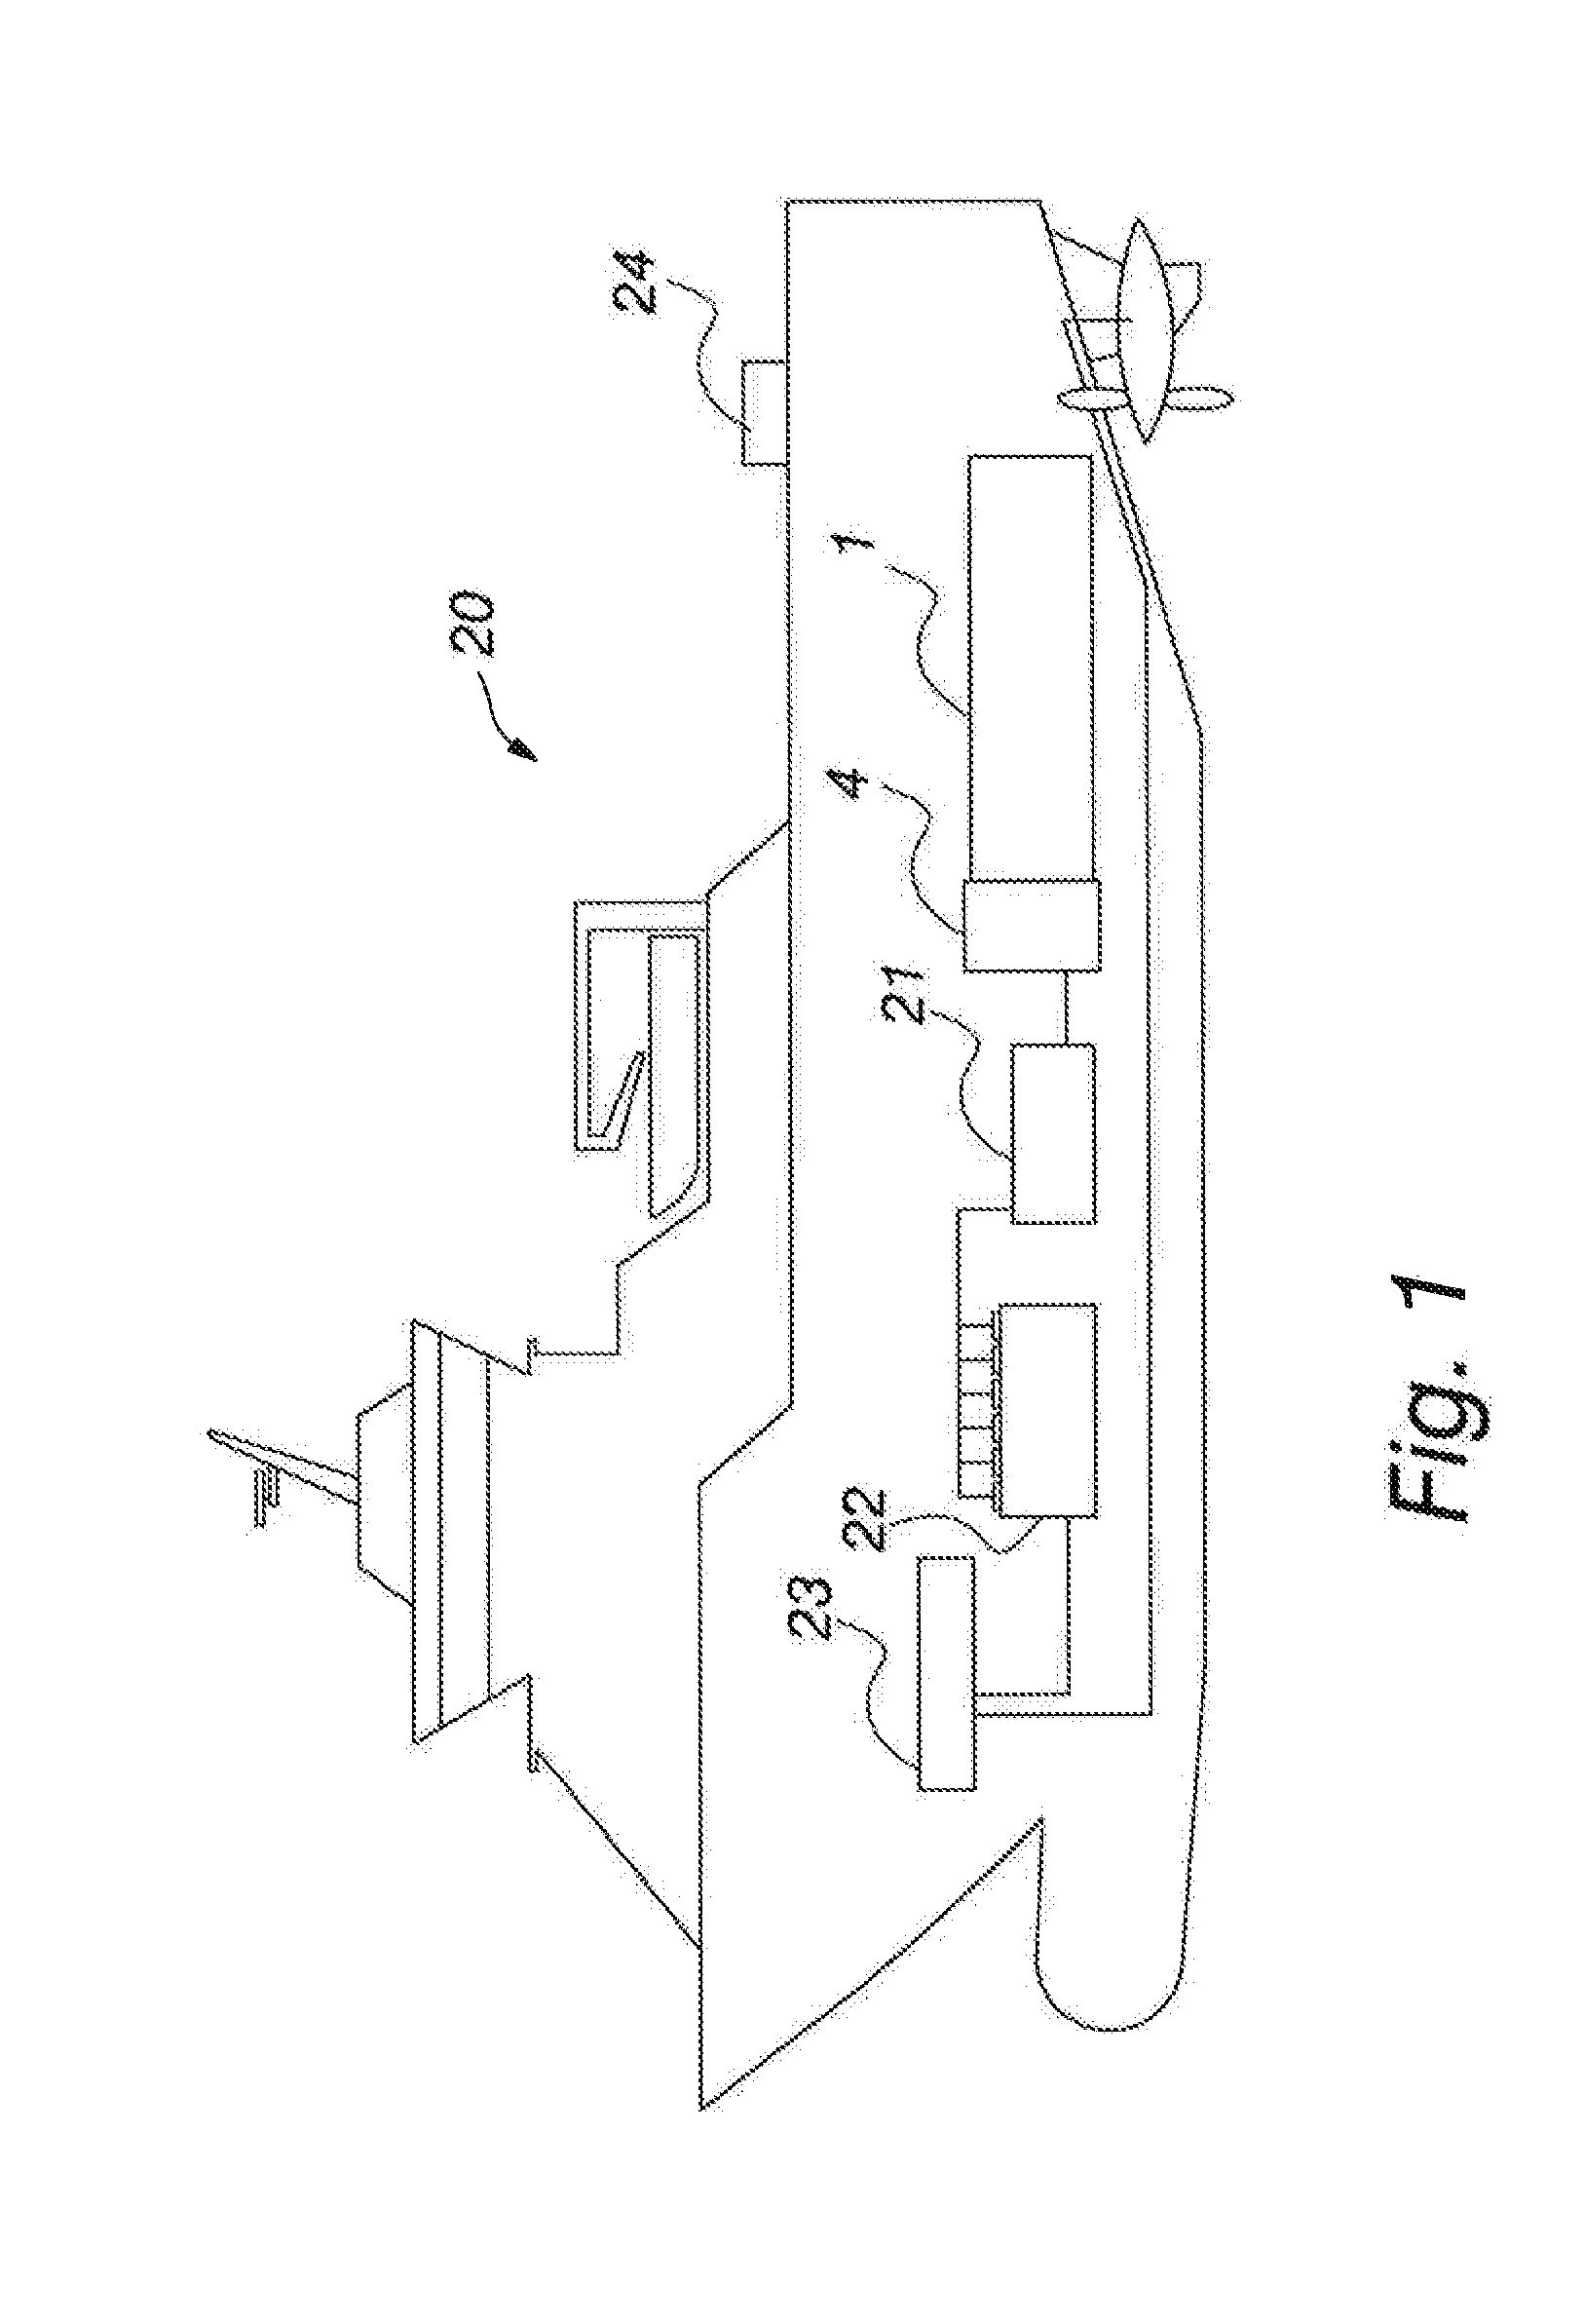 Arrangement for connecting a pipe to a LNG tank